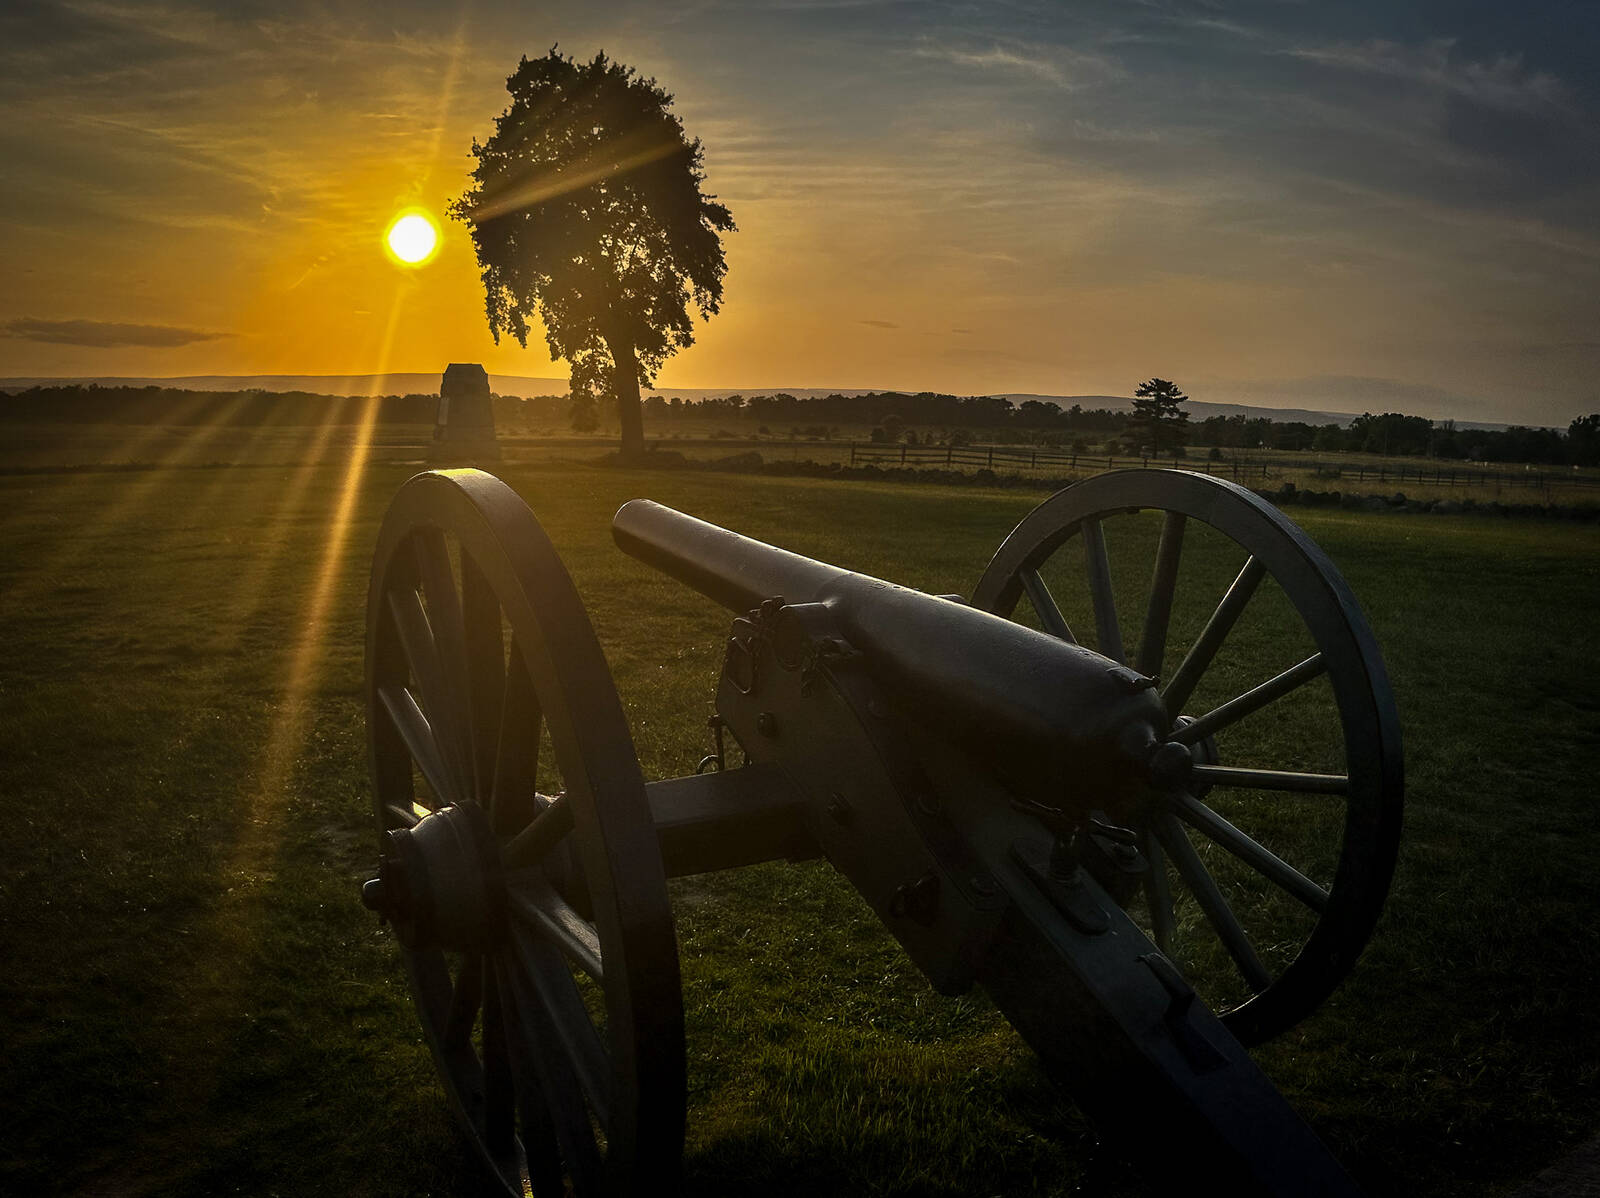 Image of Gettysburg National Military Park by Charley Corace